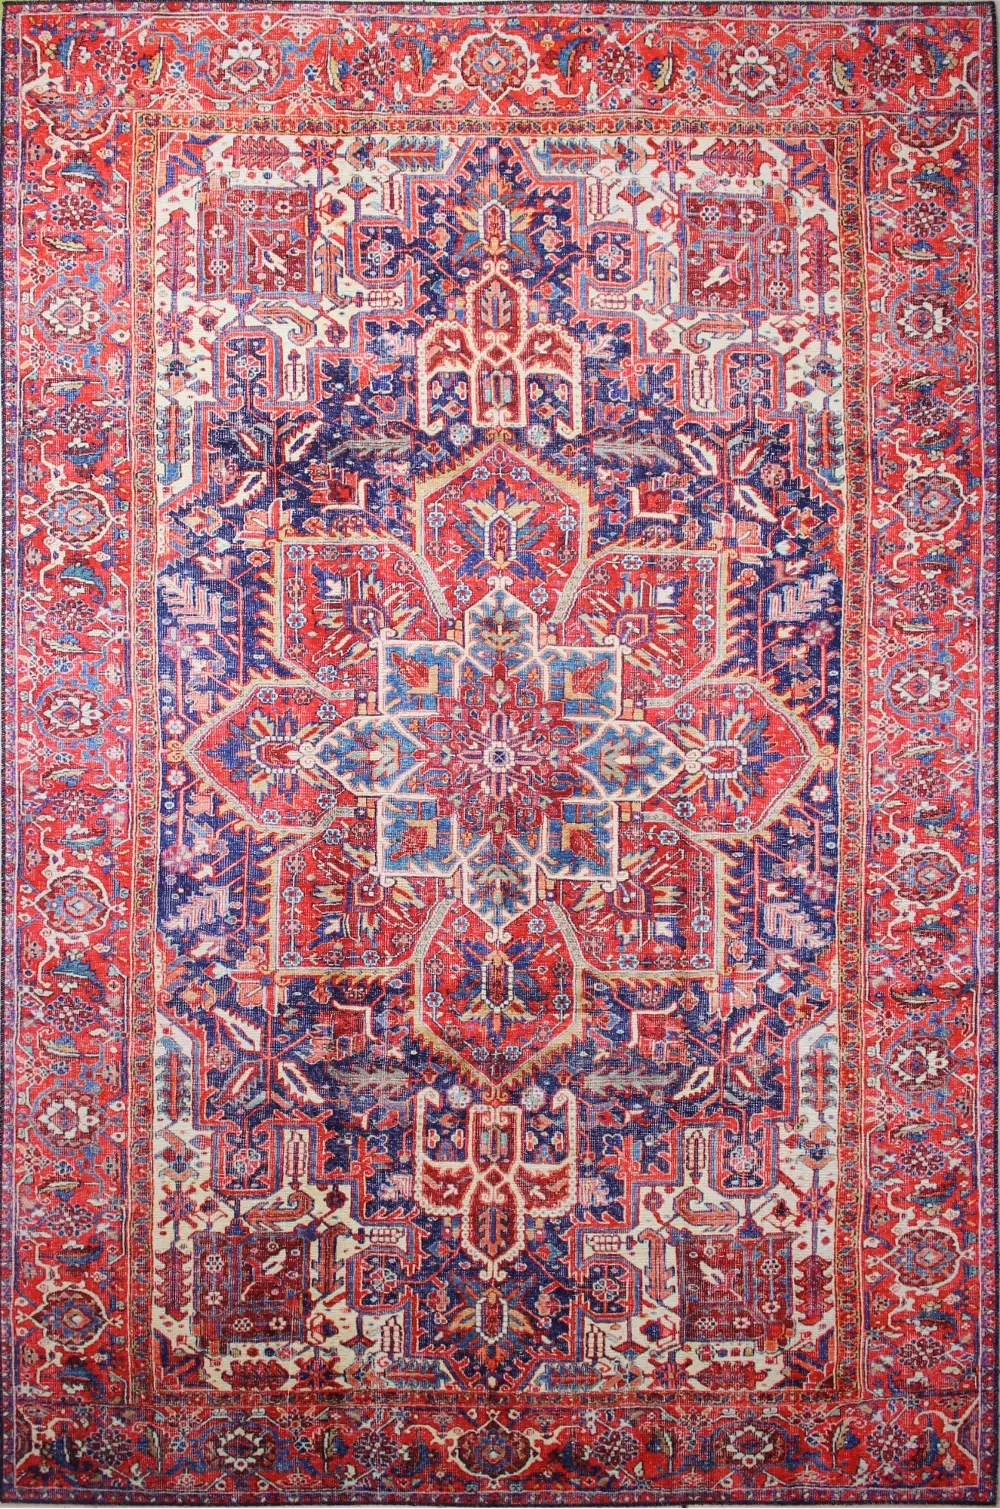 I166-DKBL-5X8-NR103 5 x 8 Medium Traditional Zacharie Blue and Red Area Rug - Impressions-1